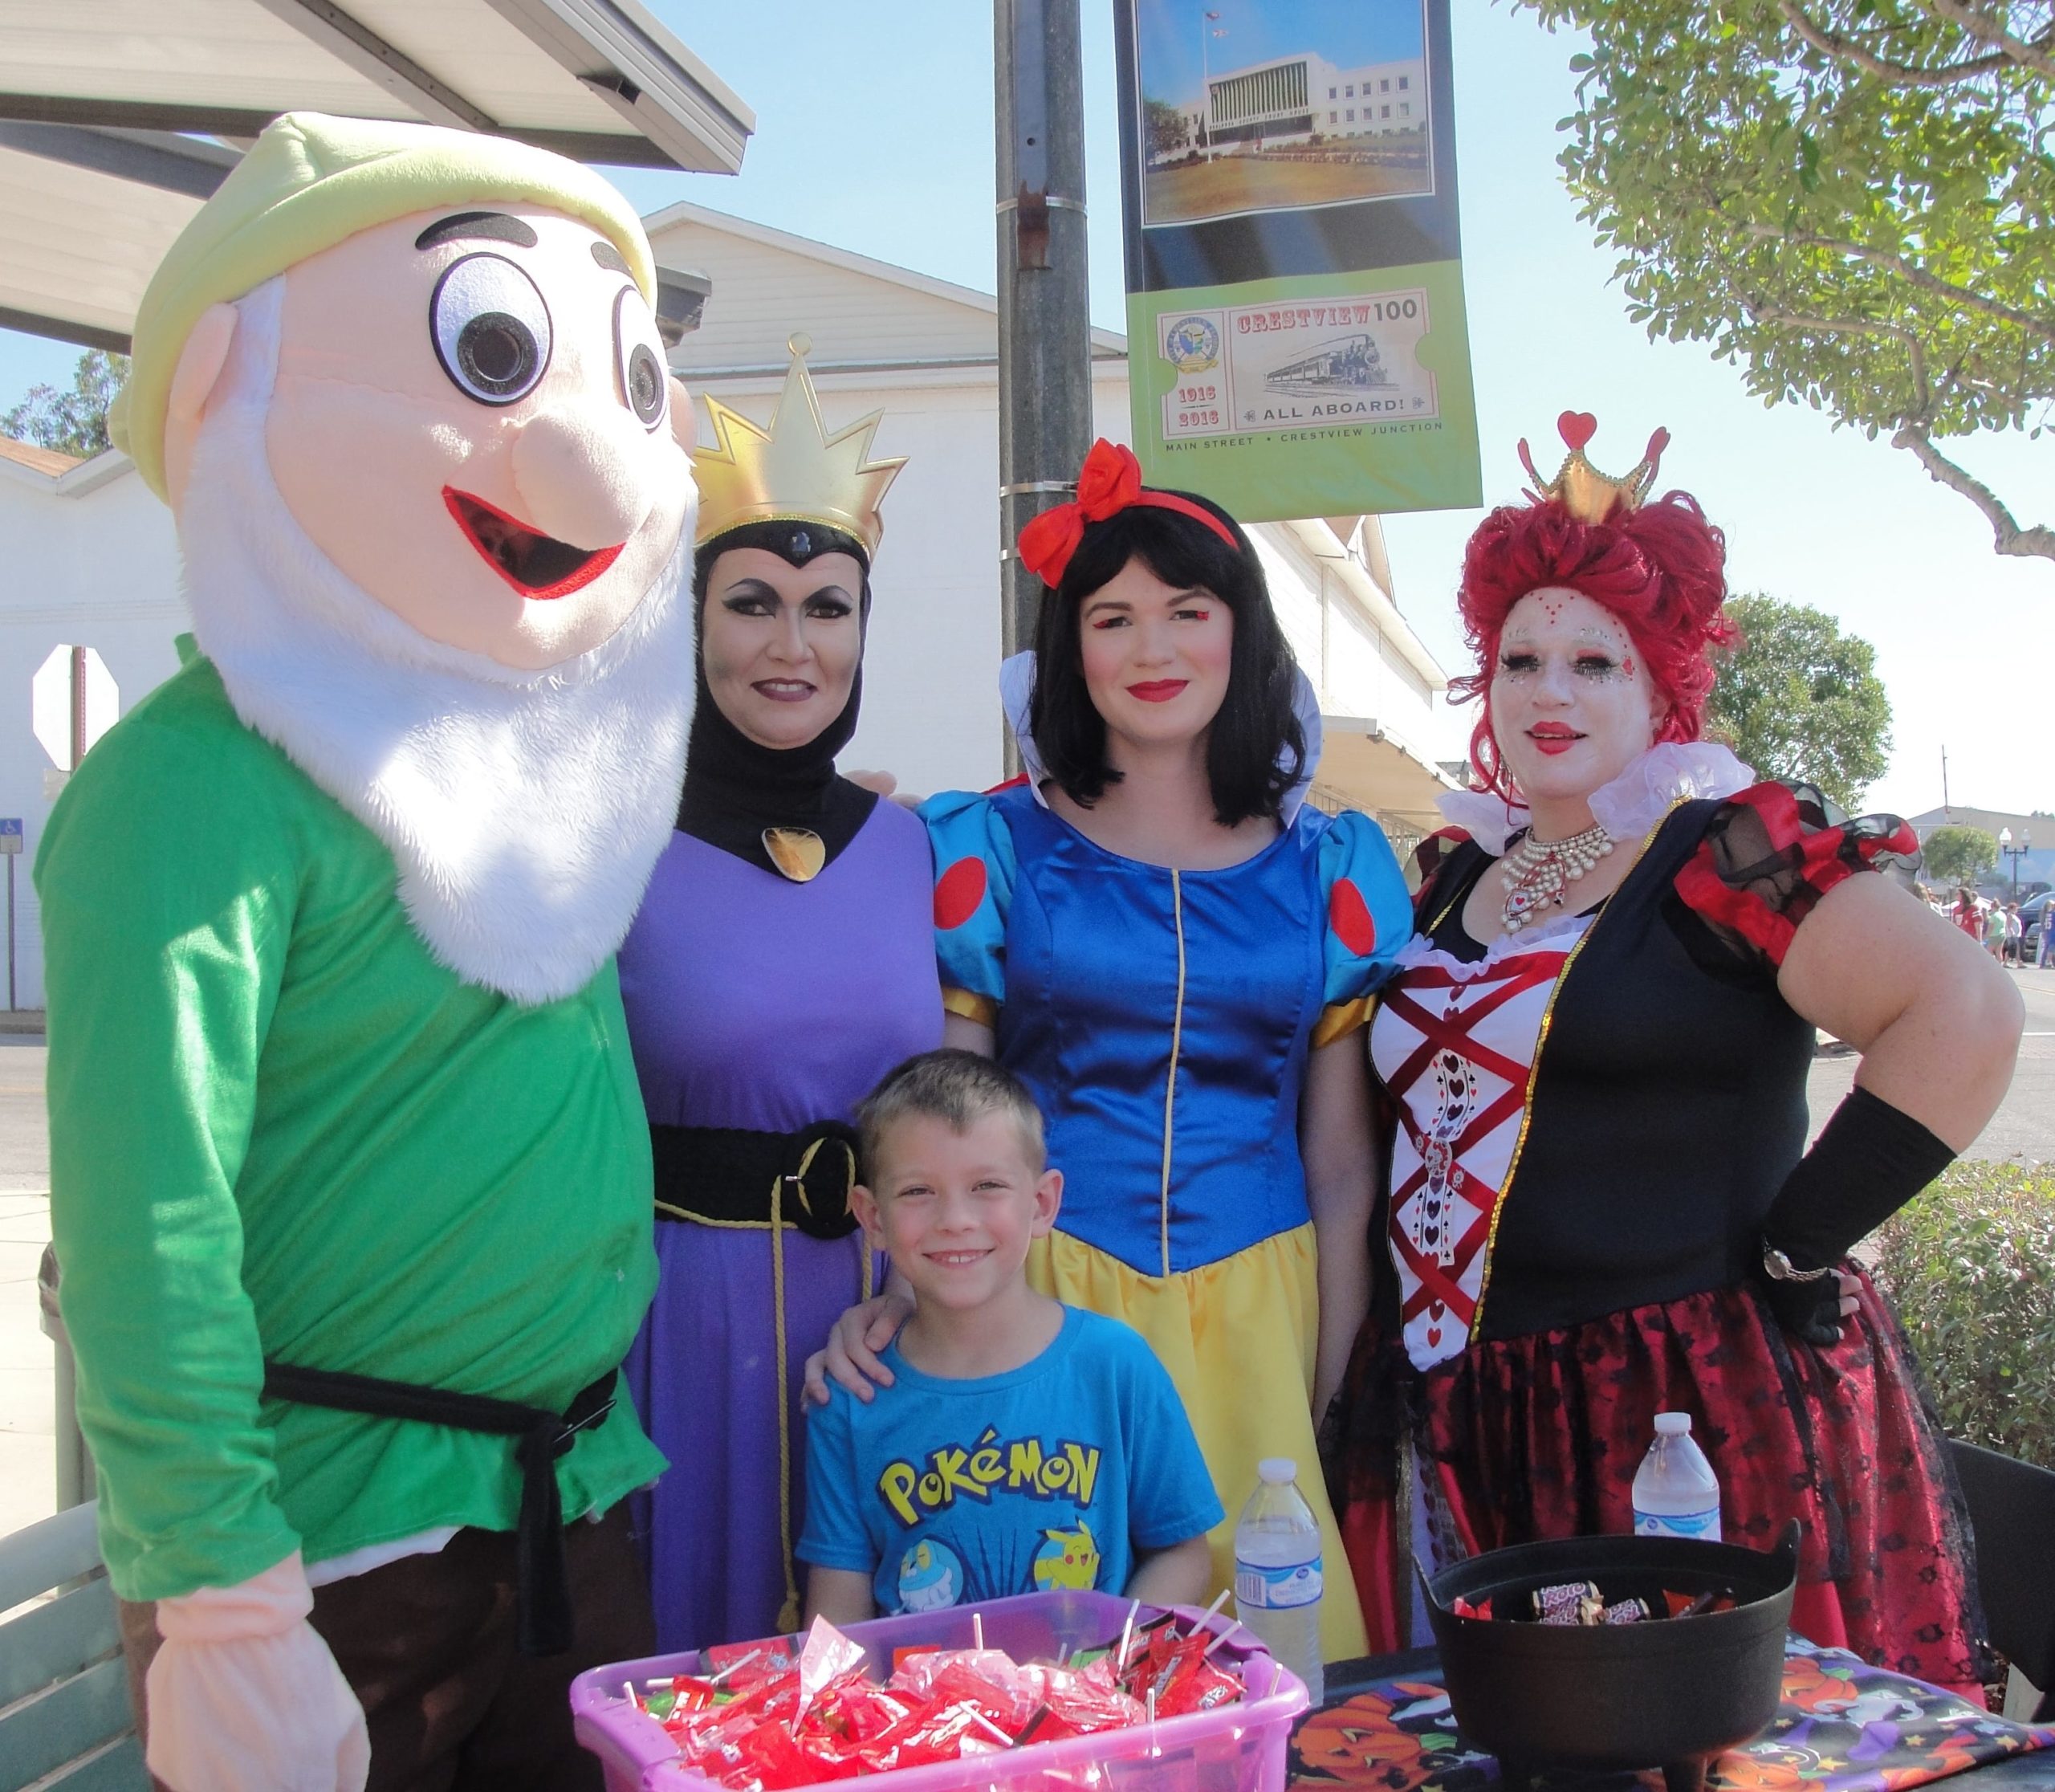 Crestview Fall Festival brings costumes, carnival food and